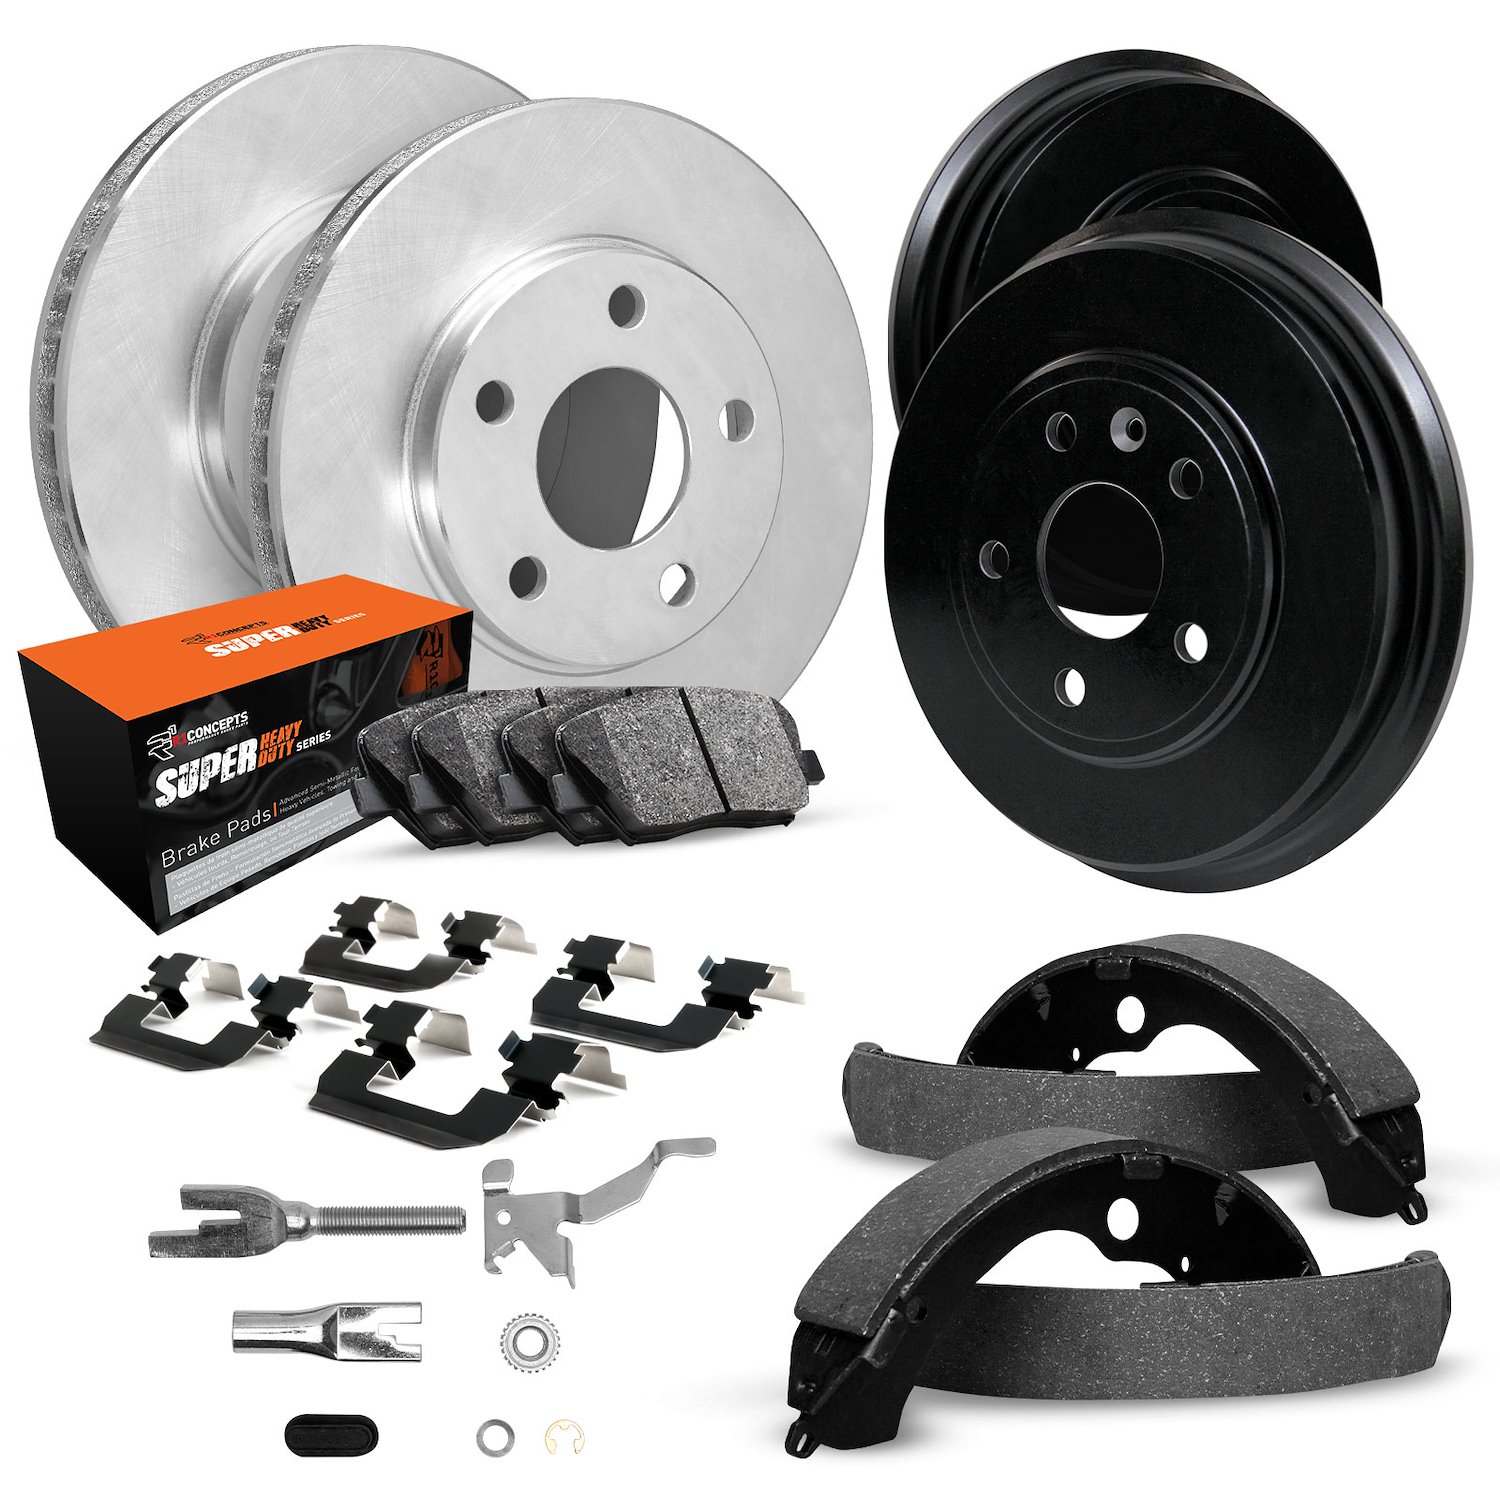 E-Line Blank Brake Rotor & Drum Set w/Super-Duty Pads, Shoes, Hardware, & Adjusters, 1977-1991 GM, Position: Front & Rear